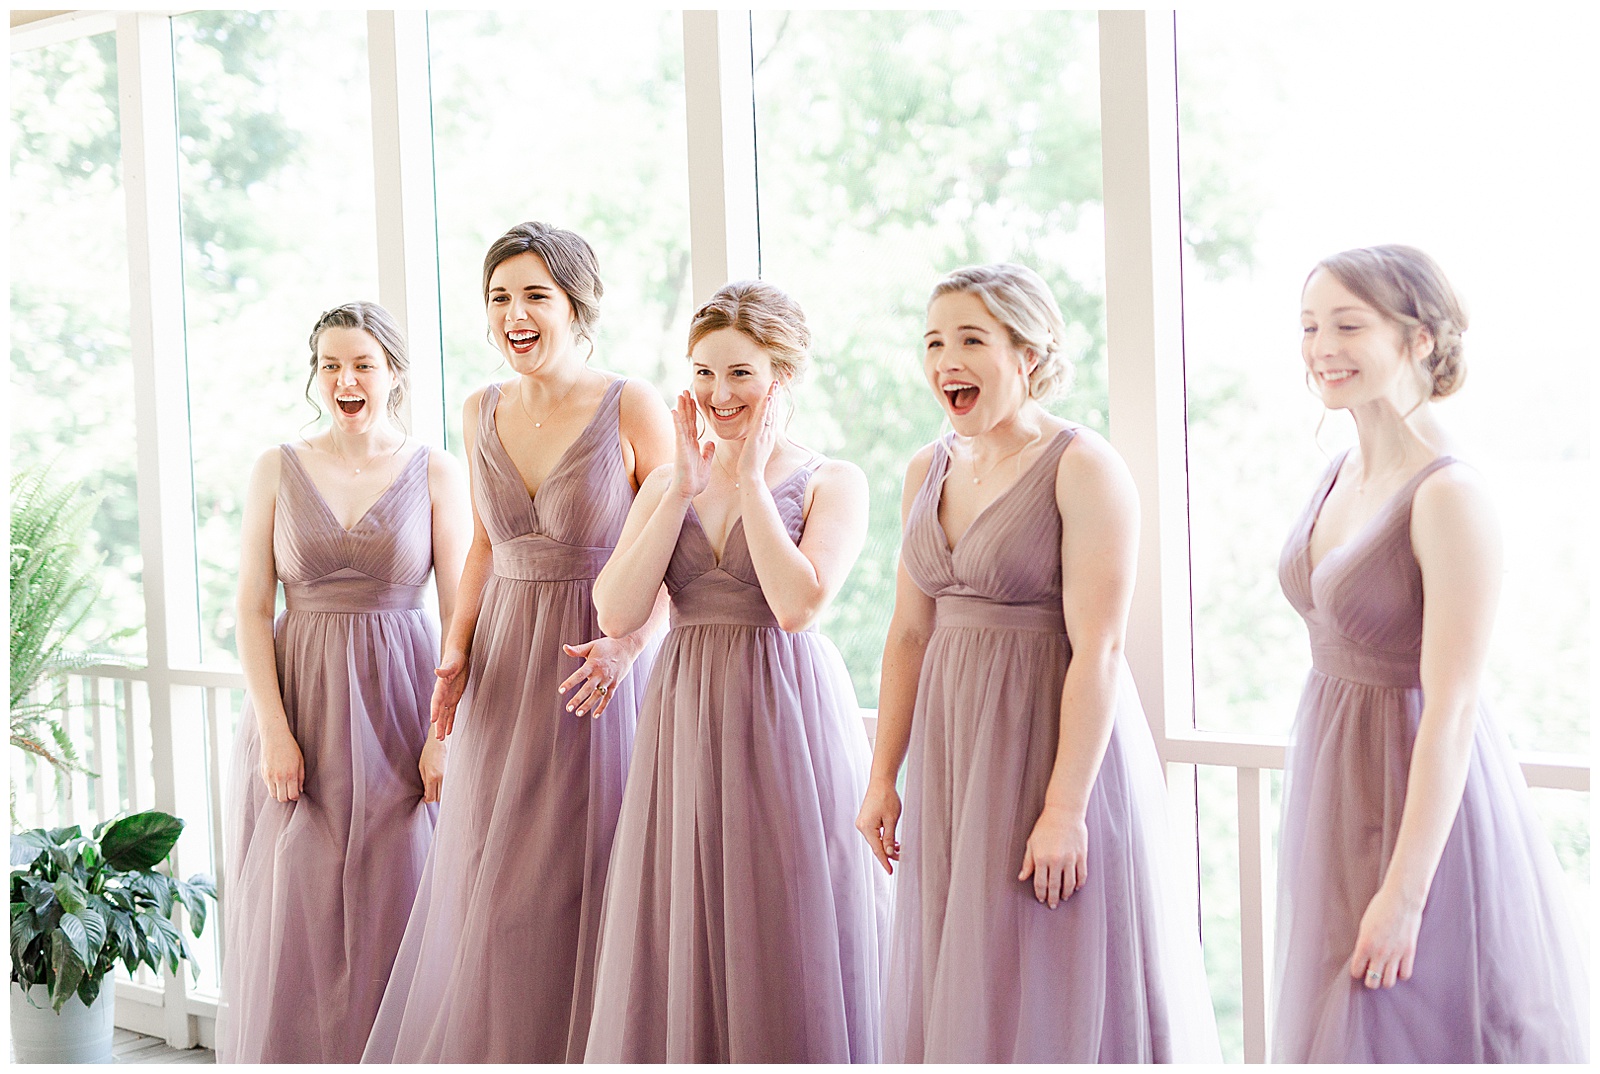 Lavender Purple Bridesmaid Dress Color Theme from Outdoorsy Summer Wedding at North Carolina Lakehouse in the Mountains | check out the full wedding at KevynDixonPhoto.com